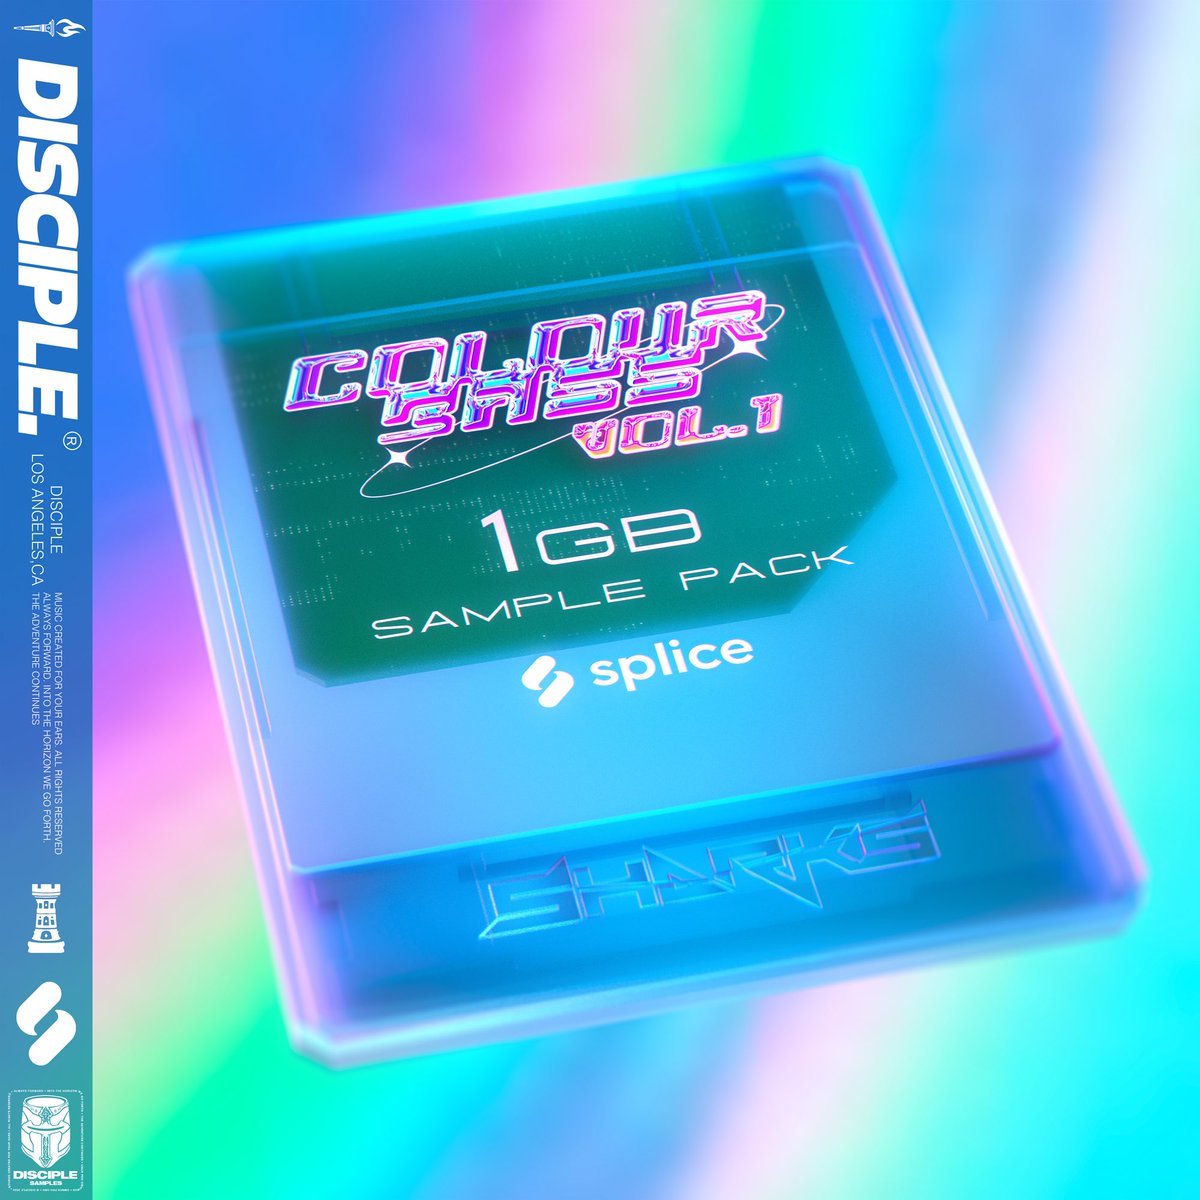 After years of everyone asking for it i am finally releasing my first huge sample pack with Disciple

Colour Bass vol.1 
June 8th on Splice
800 high quality samples
Great for any genres